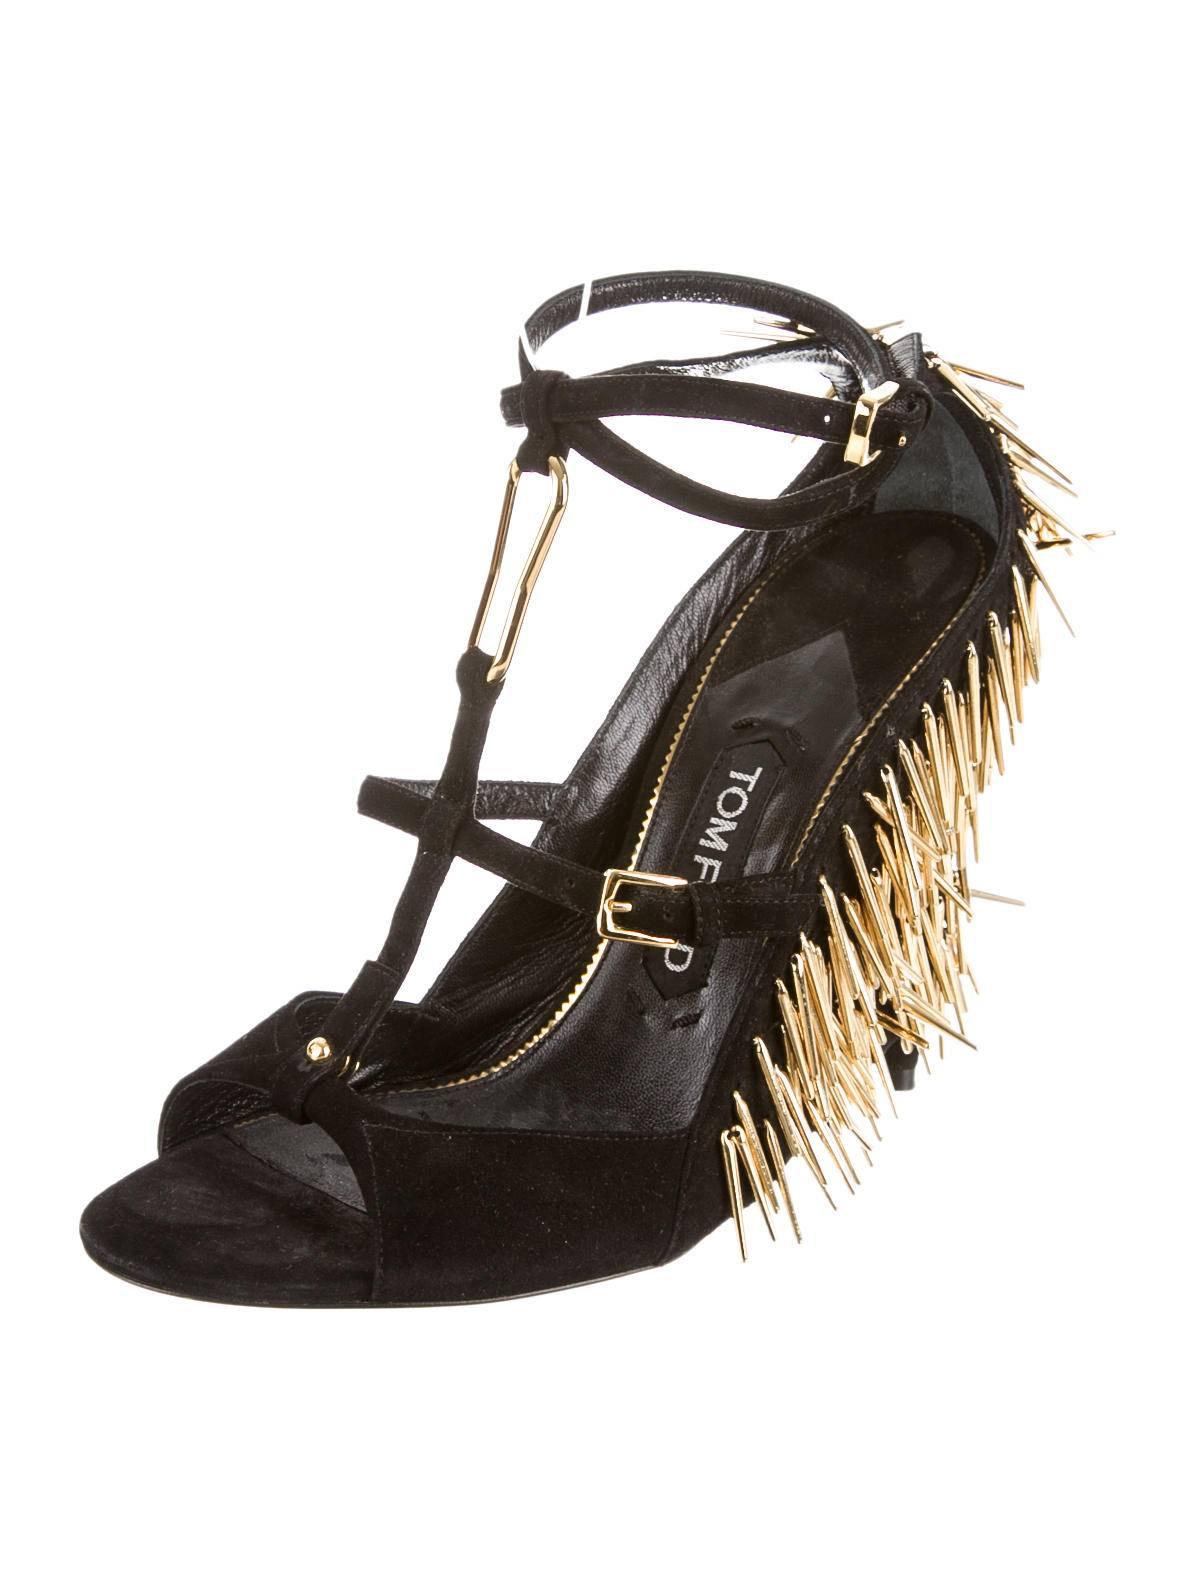 TOM FORD Spring/Summer 2013

Black suede Tom Ford peep-toe sandals with overlays featuring gold-tone spike embellishment and wrap-around ankle straps.

Color: Black, Gold
Shoe Size: 9
Estimated Retail: $2,970.00
Condition: Very Good. Light